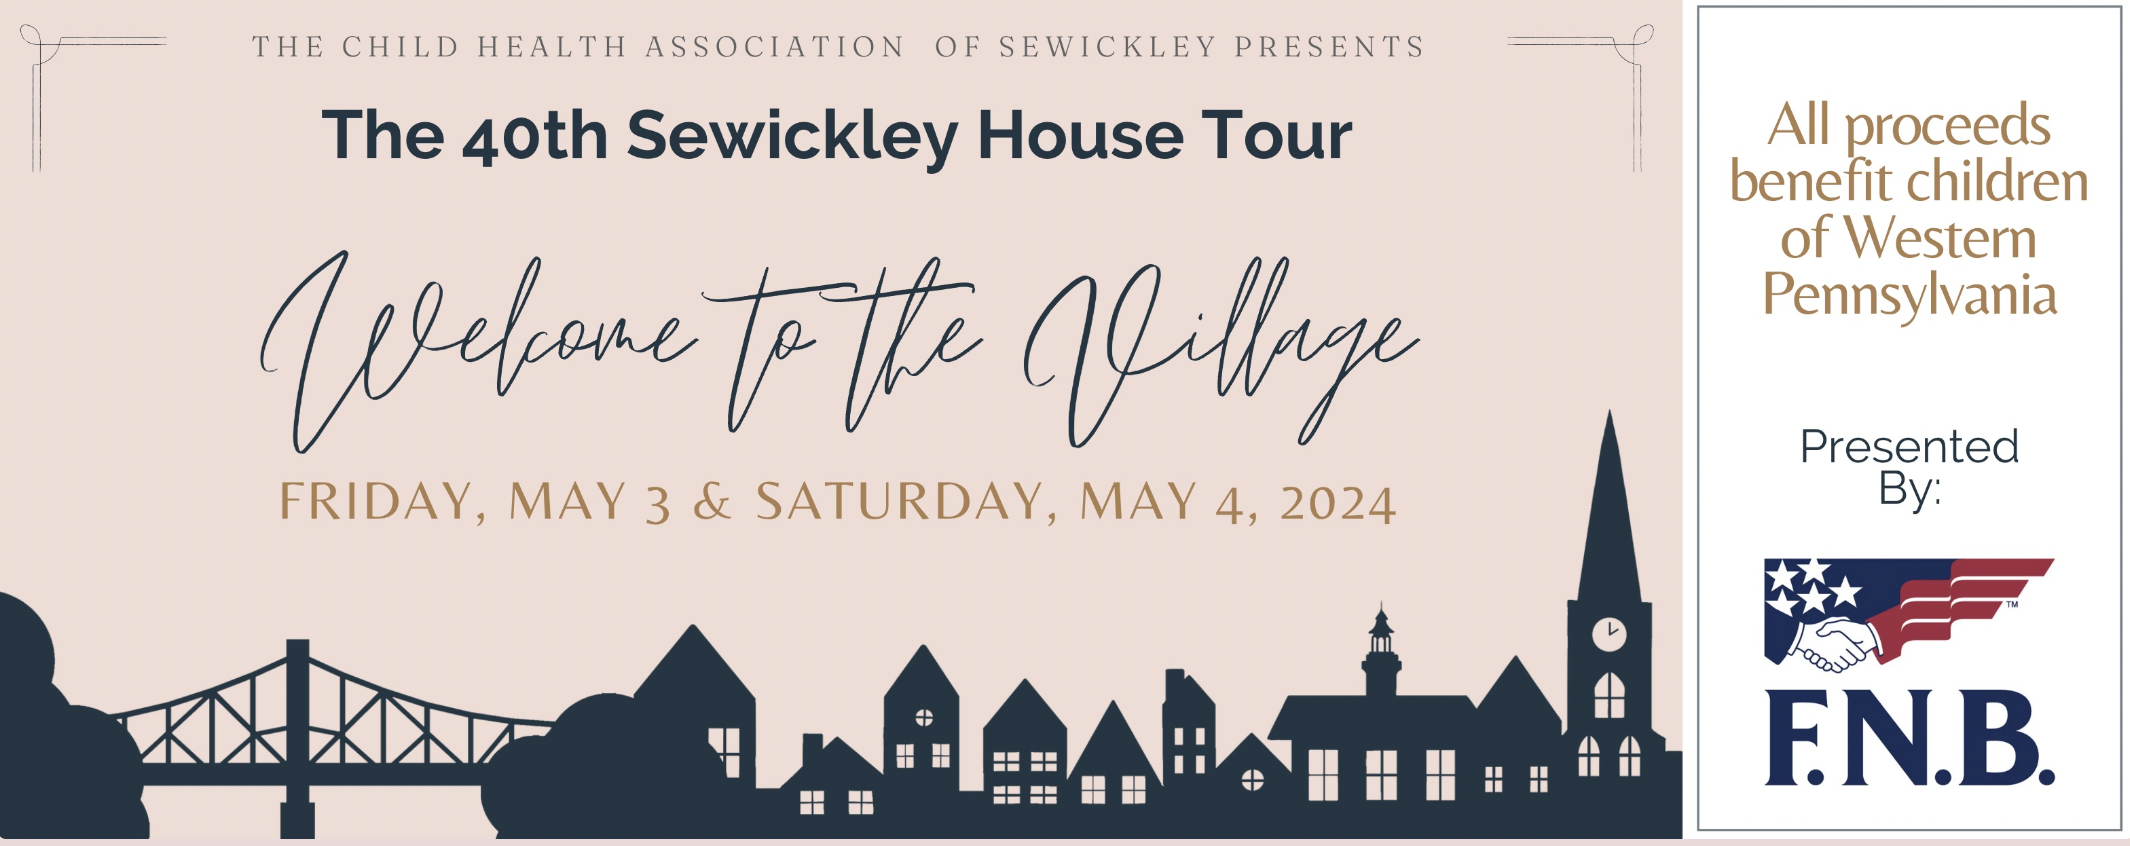 A pink graphic for the house tour. Text on the graphic reads: 
"The Child Health Association of Sewickley Presents 
The 40th Sewickley House Tour
Welcome to the Village
Friday, May 3 & Saturday, May 4, 2024".
A white sidebar reads: "All proceeds benefit children of Western Pennsylvania
Presented By:" F.N.B. logo.